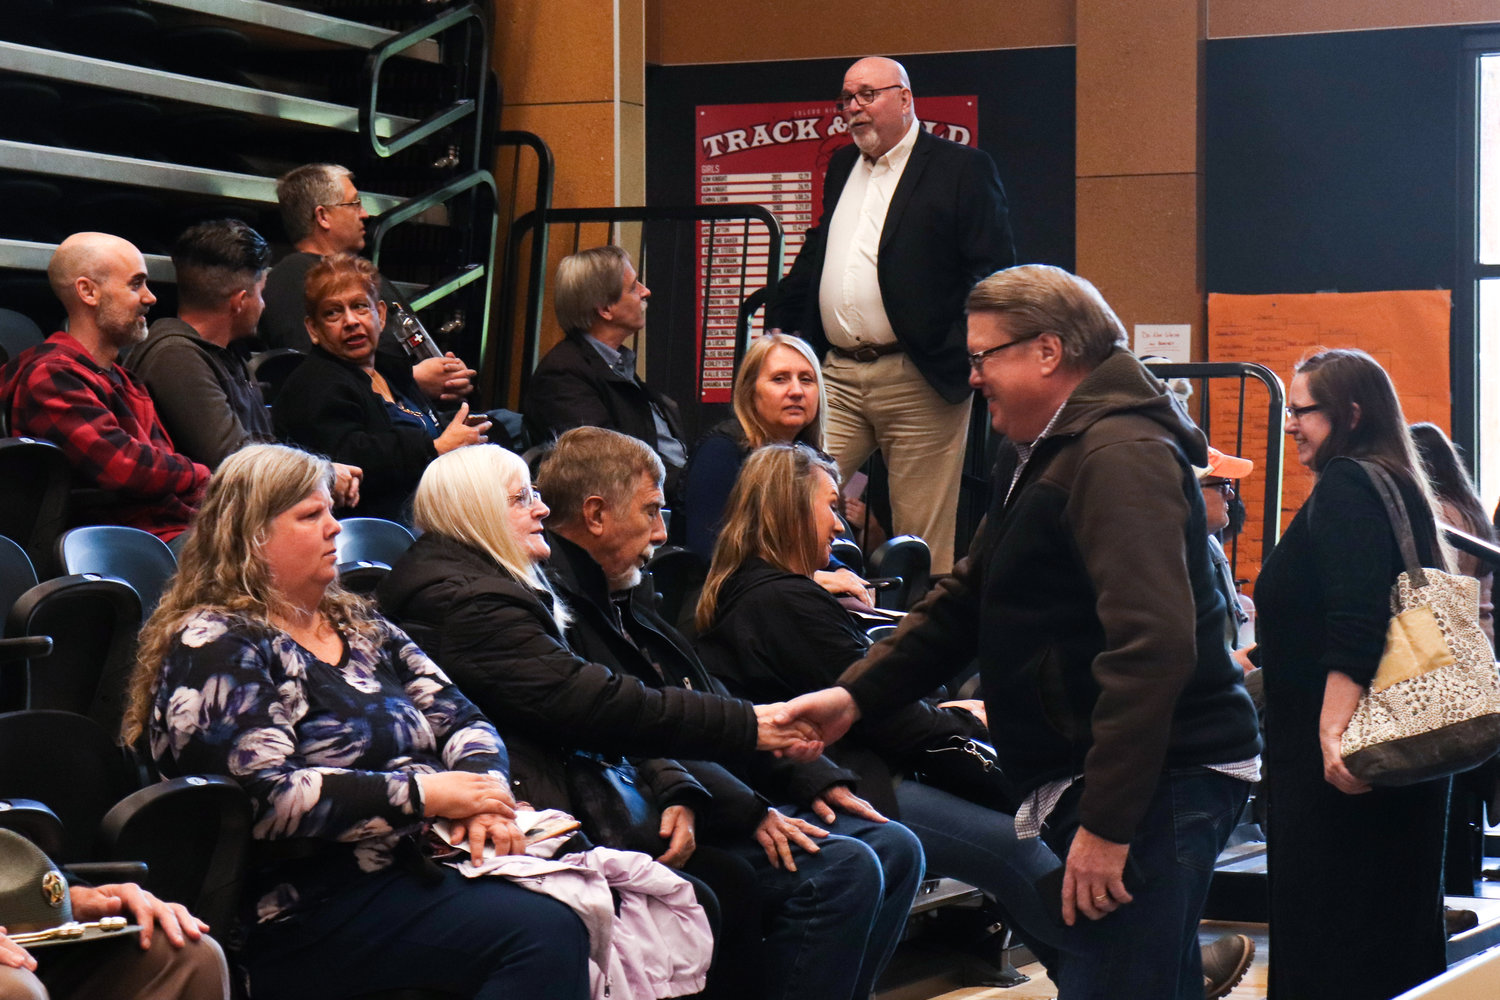 Attendees greet each other before the Big Toledo Community Meeting at Toledo High School on Thursday. The meeting is for residents from the greater Toledo area to gather, share information, project updates, upcoming events and ideas for Toledo.